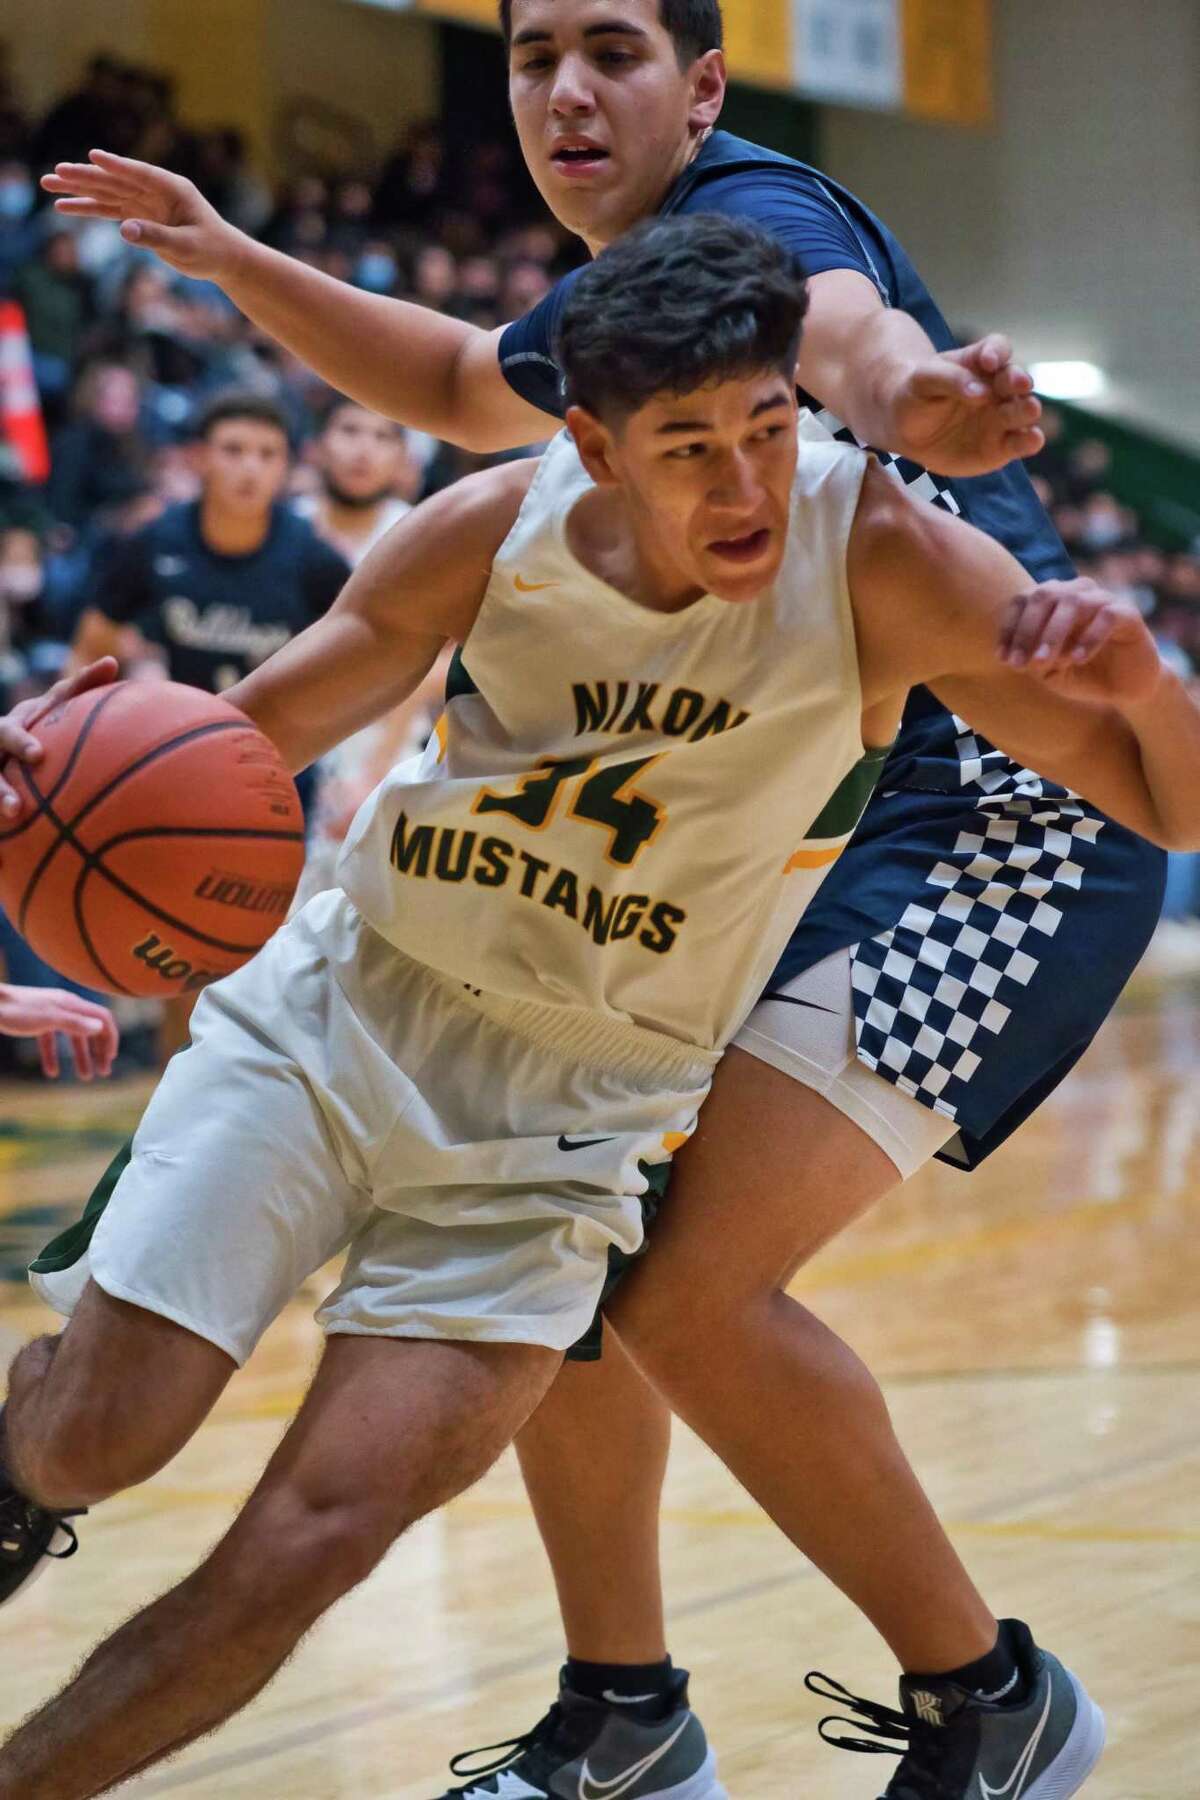 Ian Tovar and the Nixon Mustangs defeated the Alexander Bulldogs 56-53 on Friday.